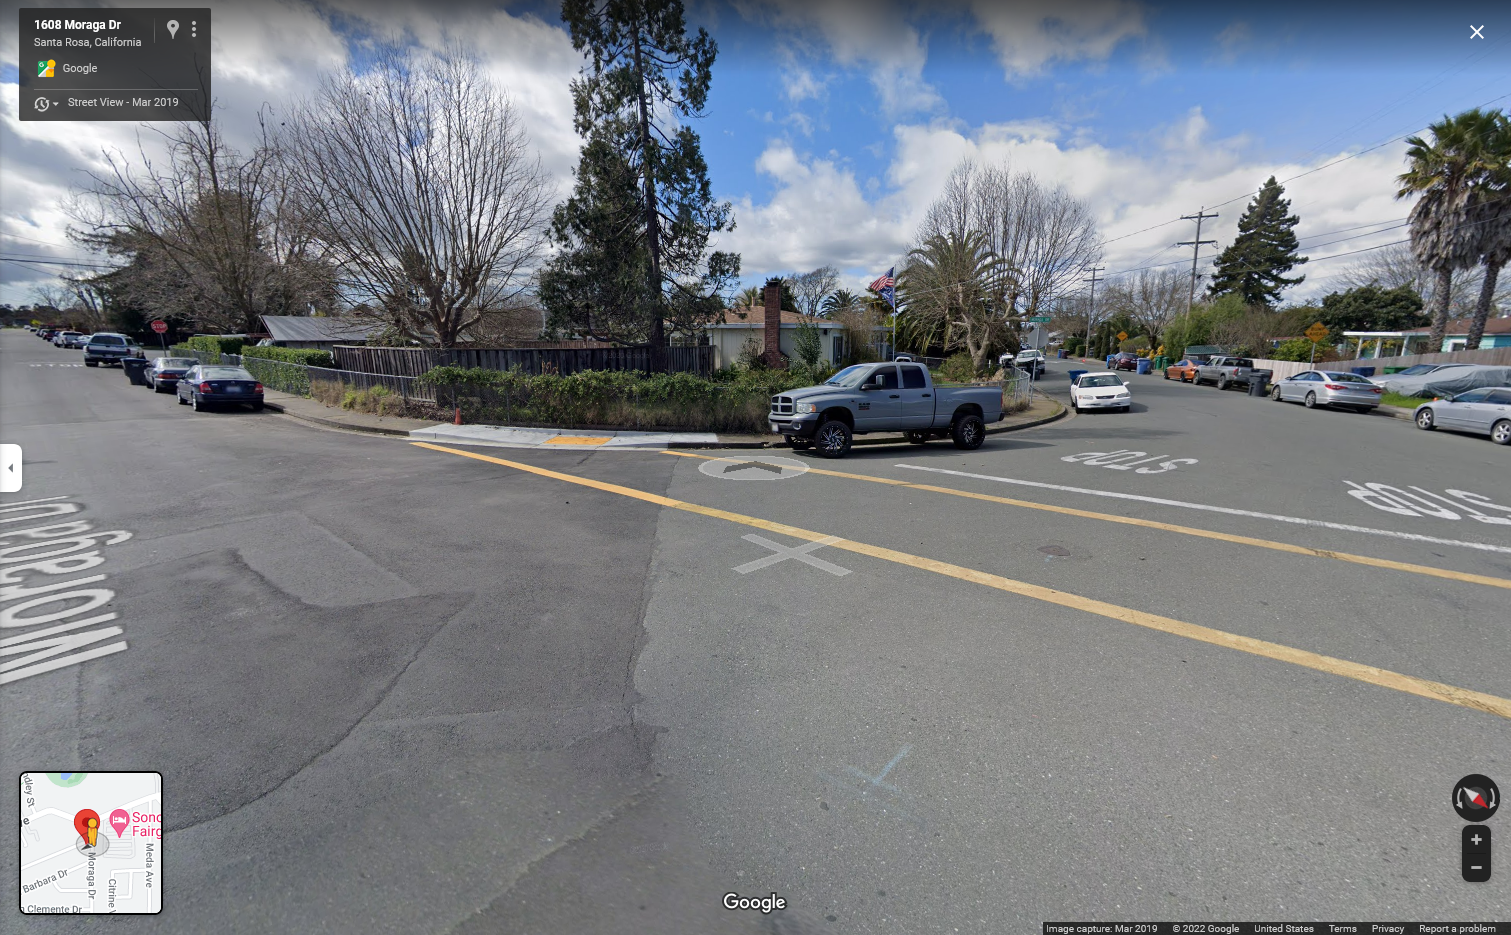 Street view for 1608 Morgana Dr showing on the other side an intersection in a residential neighborhood